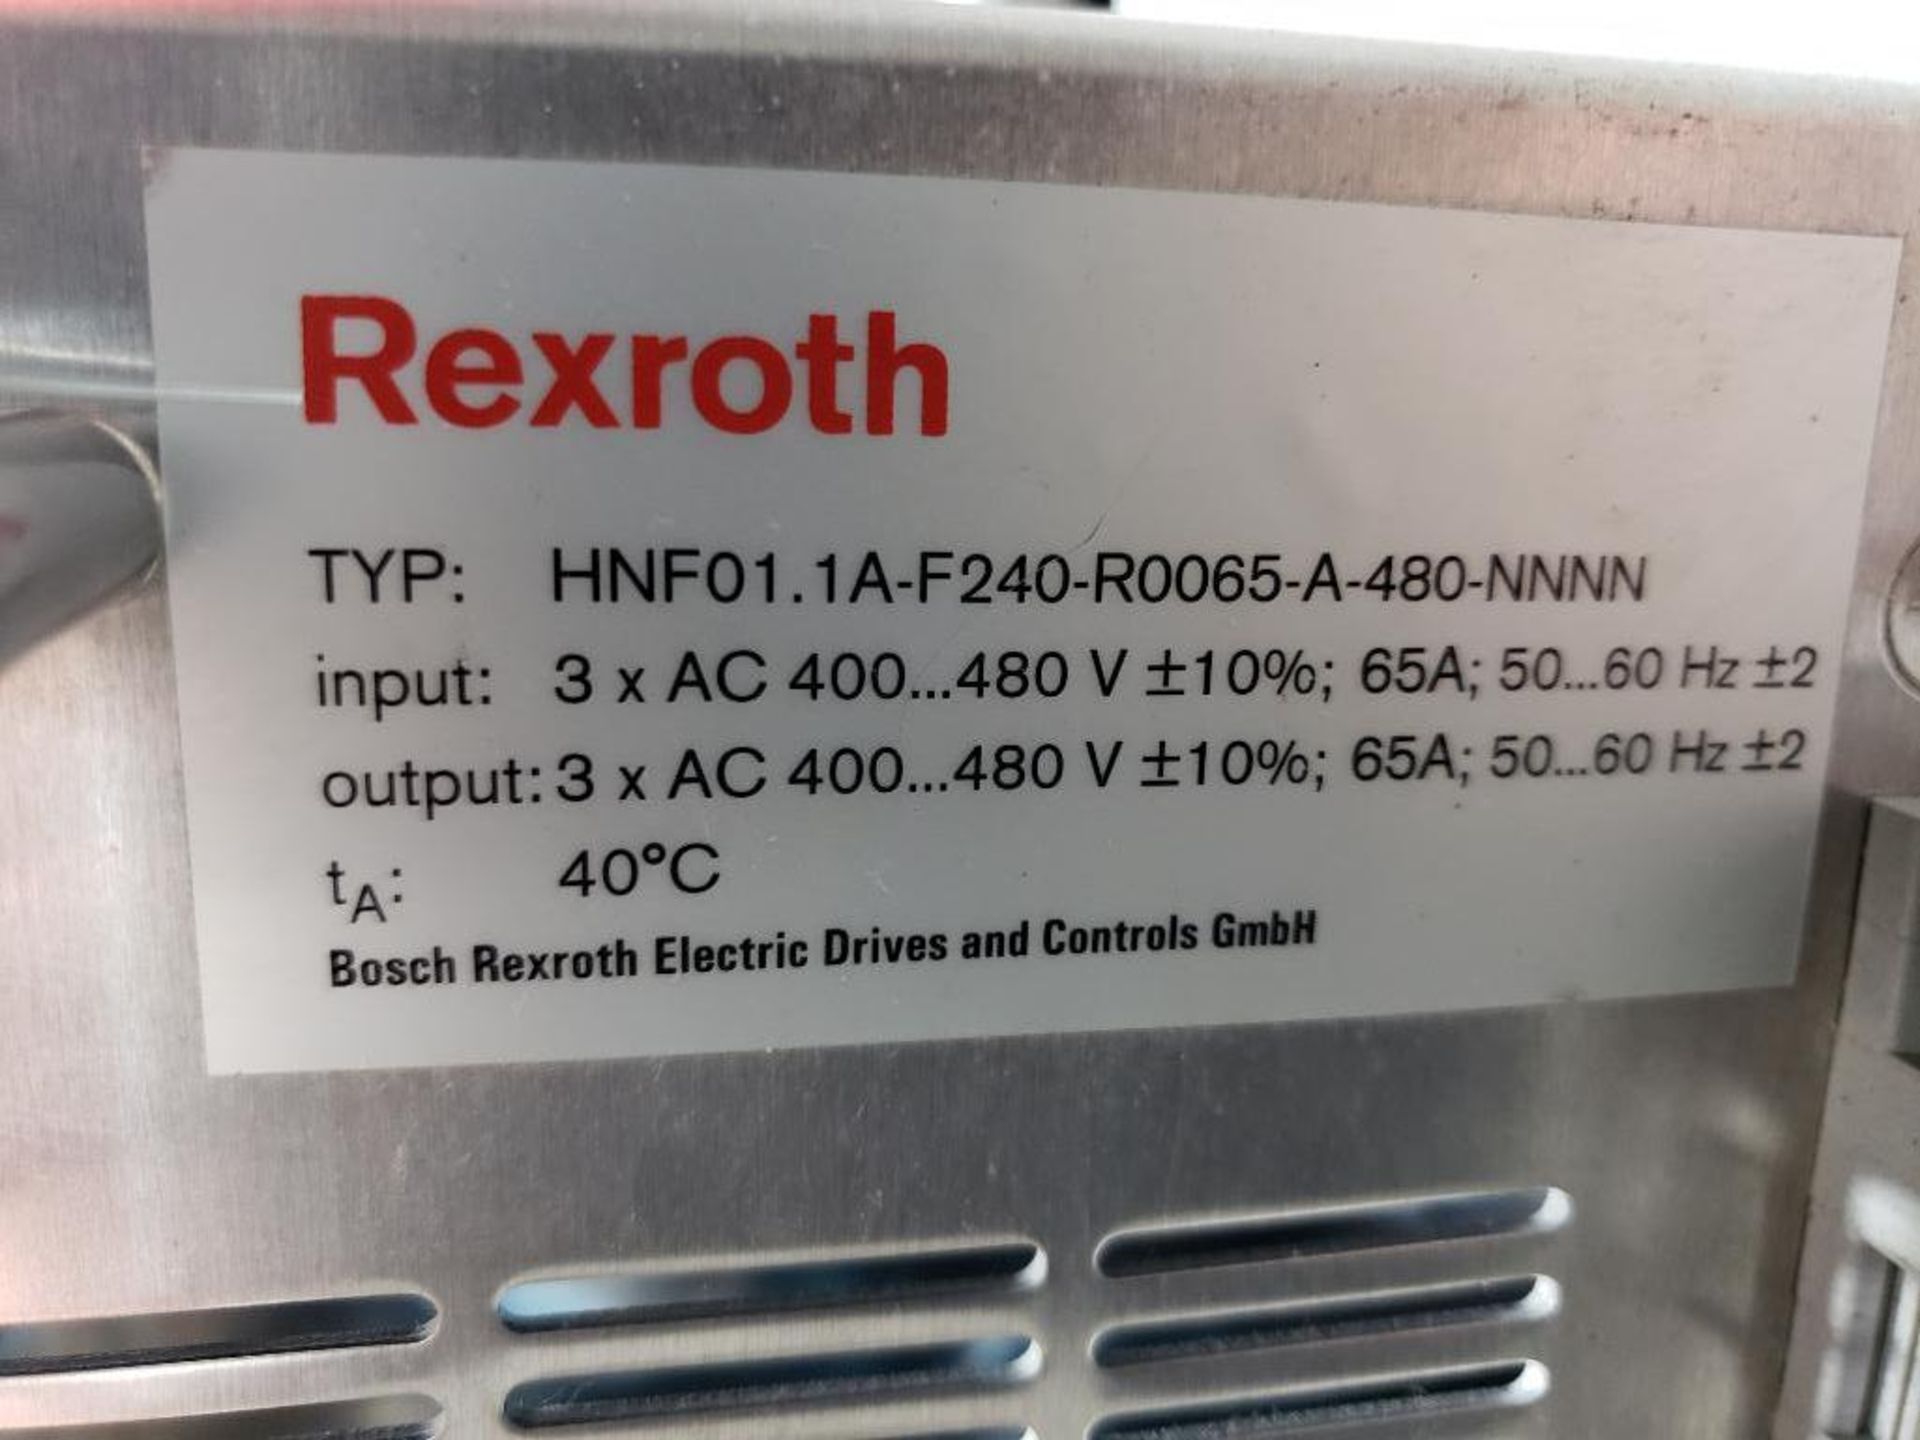 Rexroth drive. Model number HNF01.1A-F240-R0065-A-480-NNNN. - Image 5 of 5